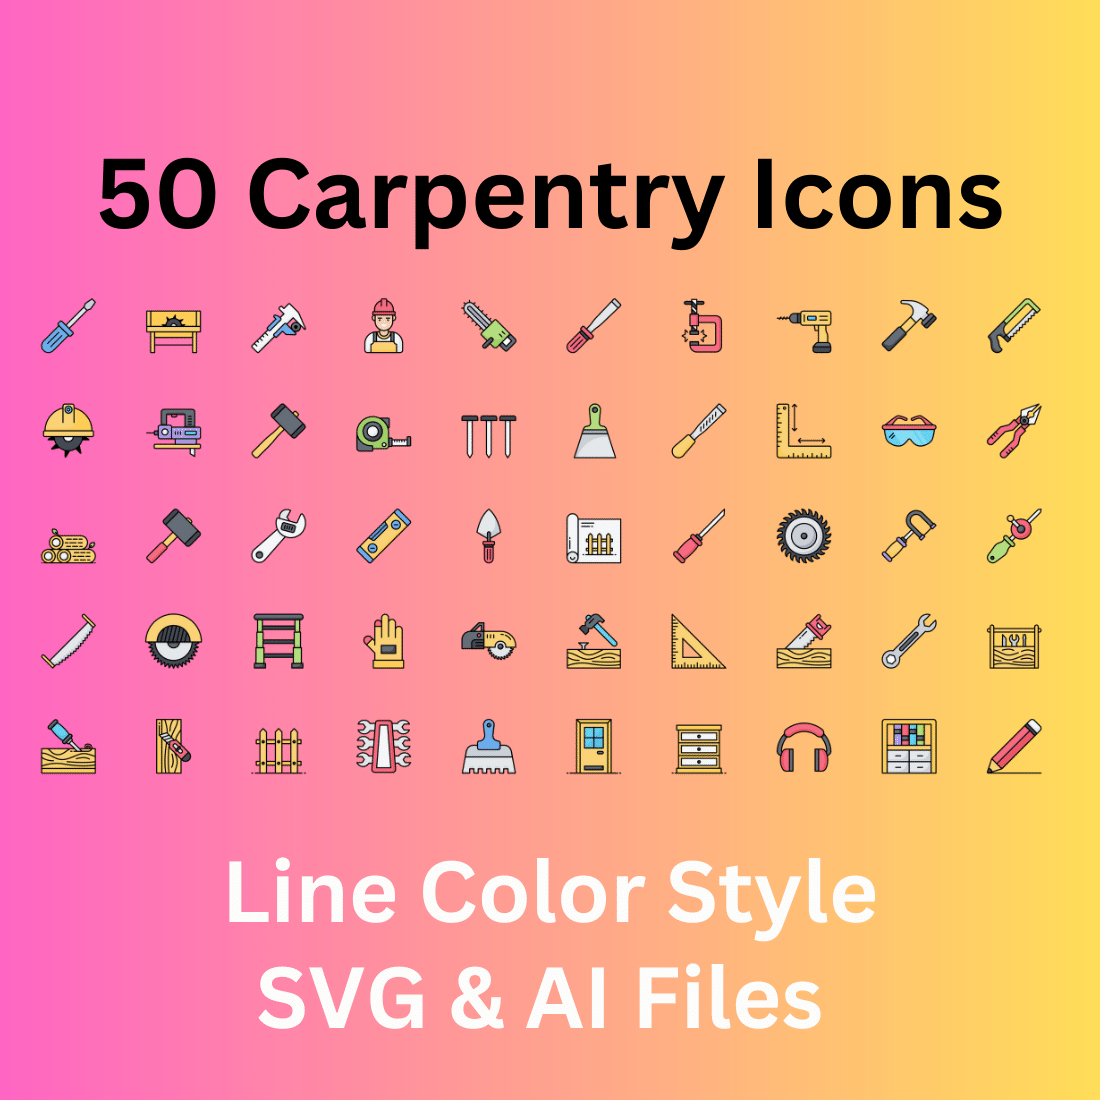 Carpentry Icon Set 50 Line Color Icons - SVG And AI Files cover image.